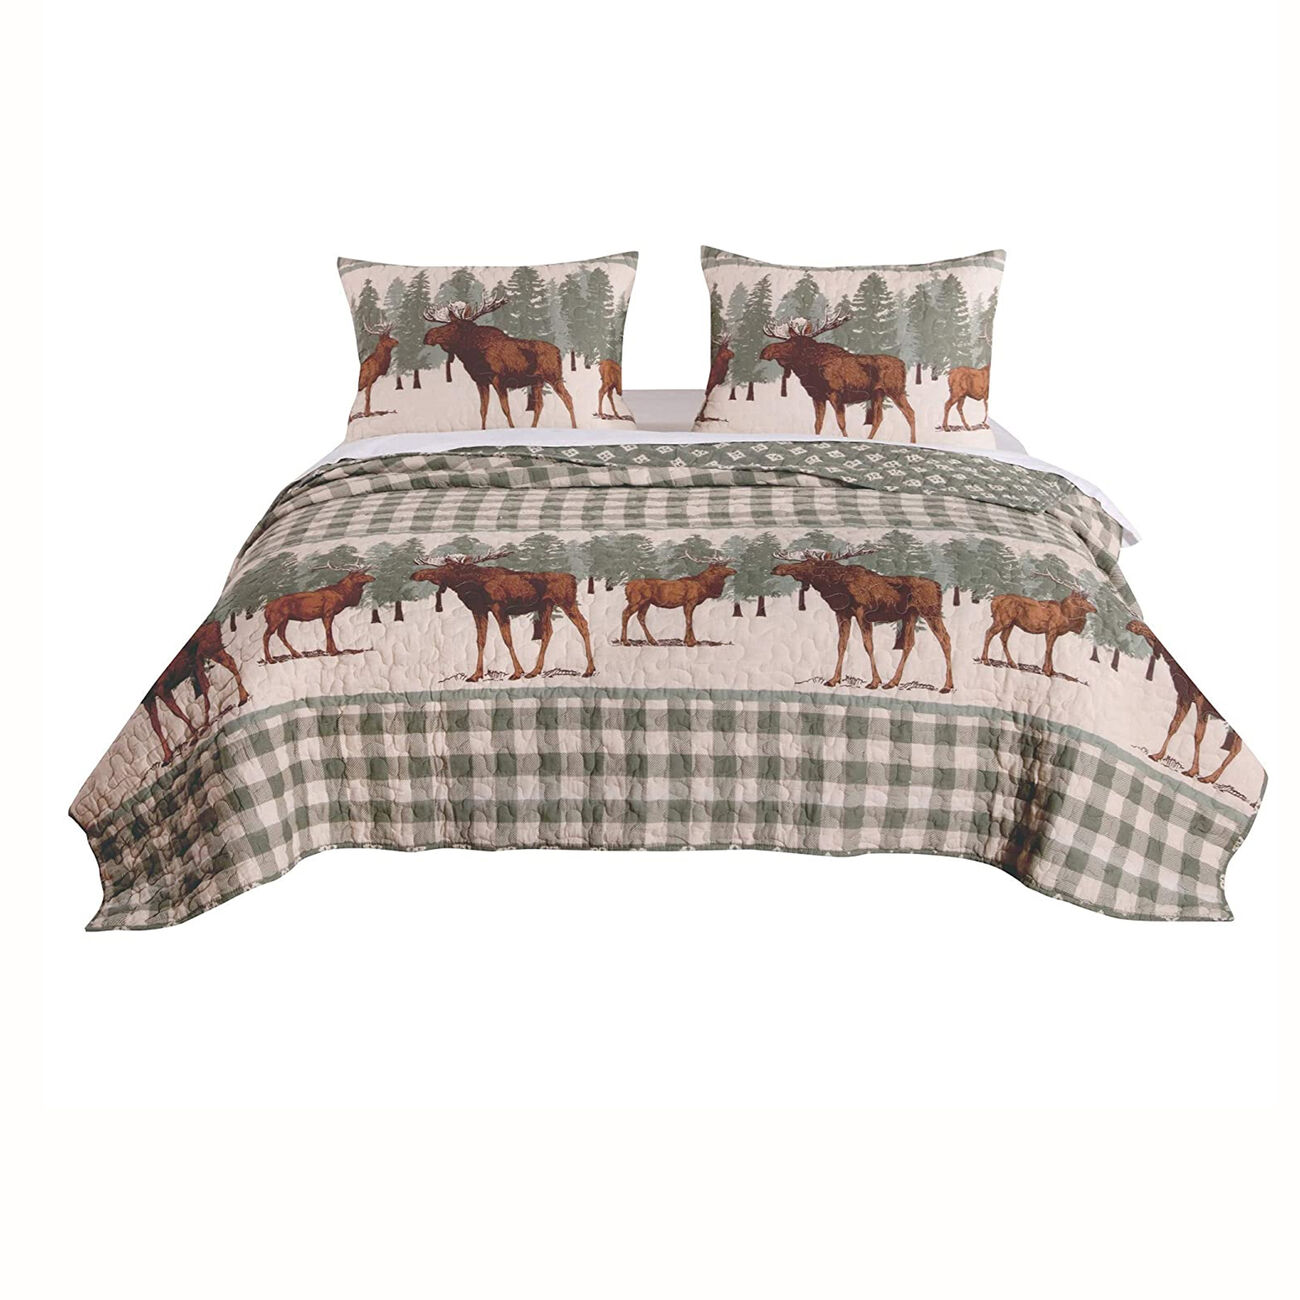 Fabric Queen Size Quilt Set with Animal and Plaid Print, Green and Brown - BM223378